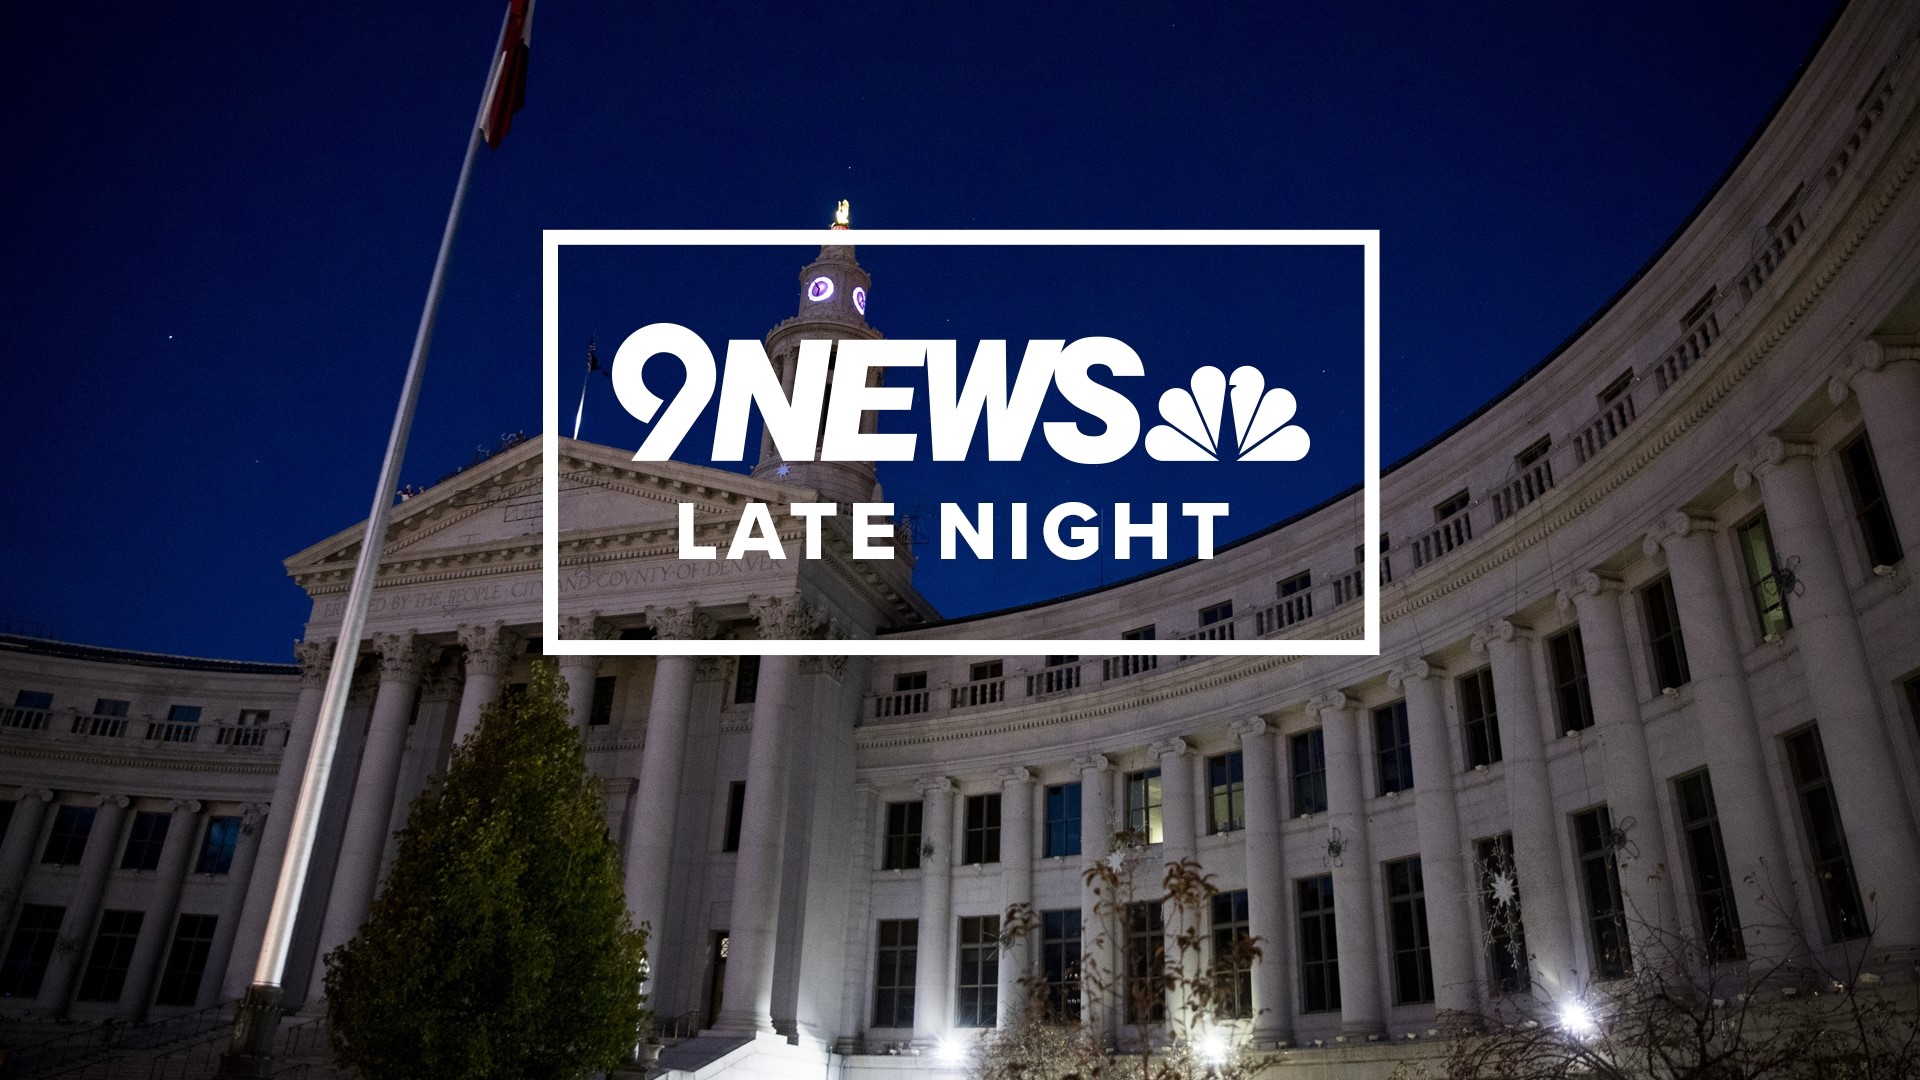 The day's major events, breaking news reports, local sports updates, weather information and tomorrow's forecast are presented by the 9NEWS team.